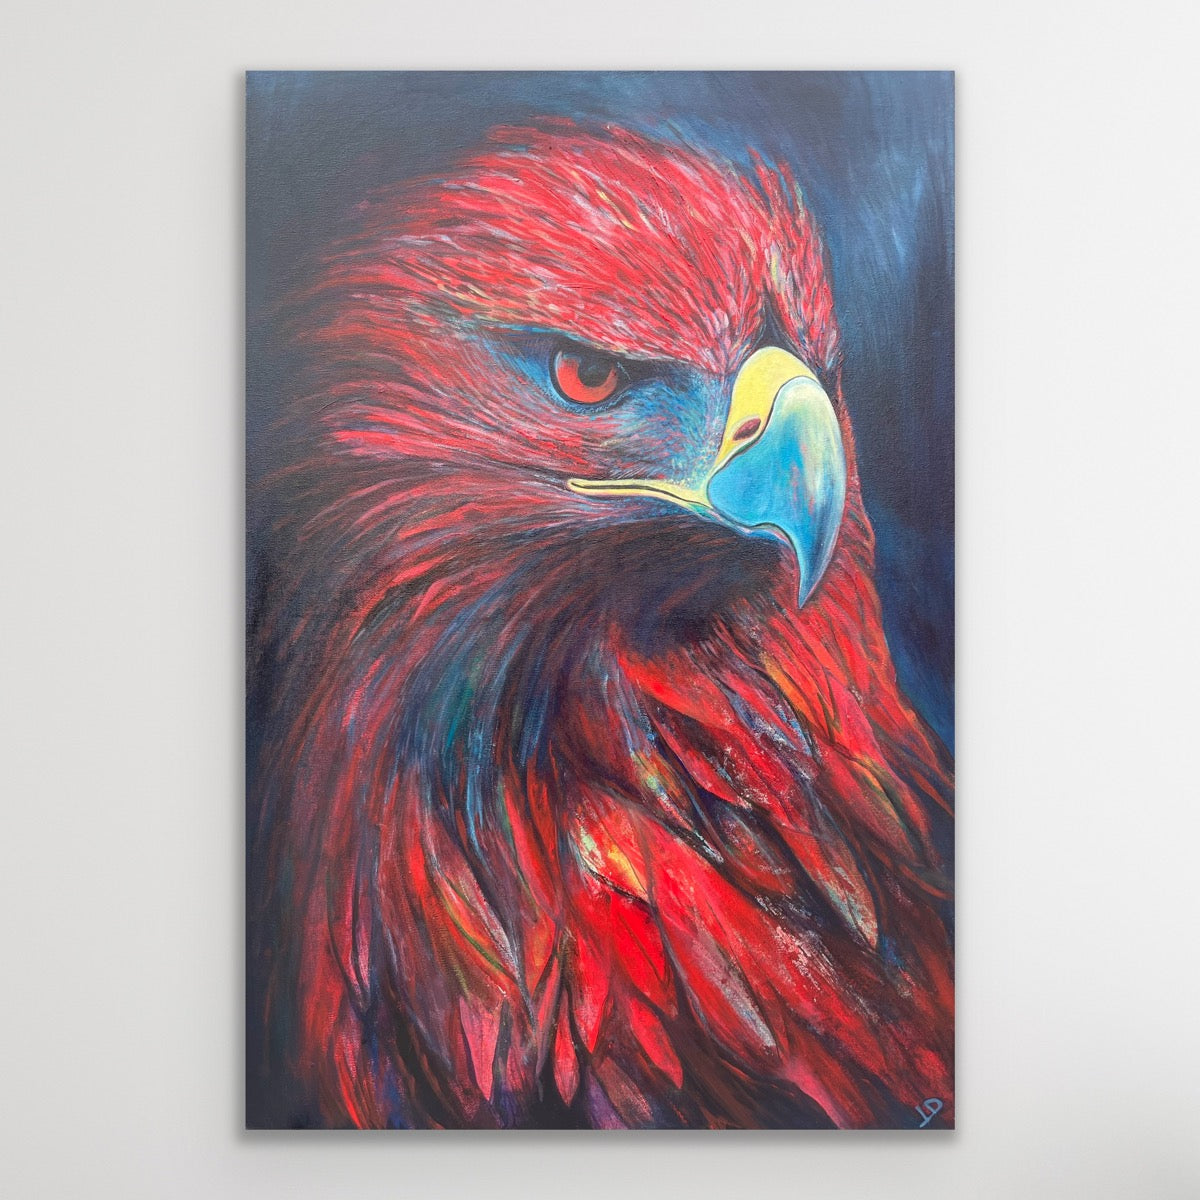 Eagle’s Blaze- Gallery Wrapped canvas print